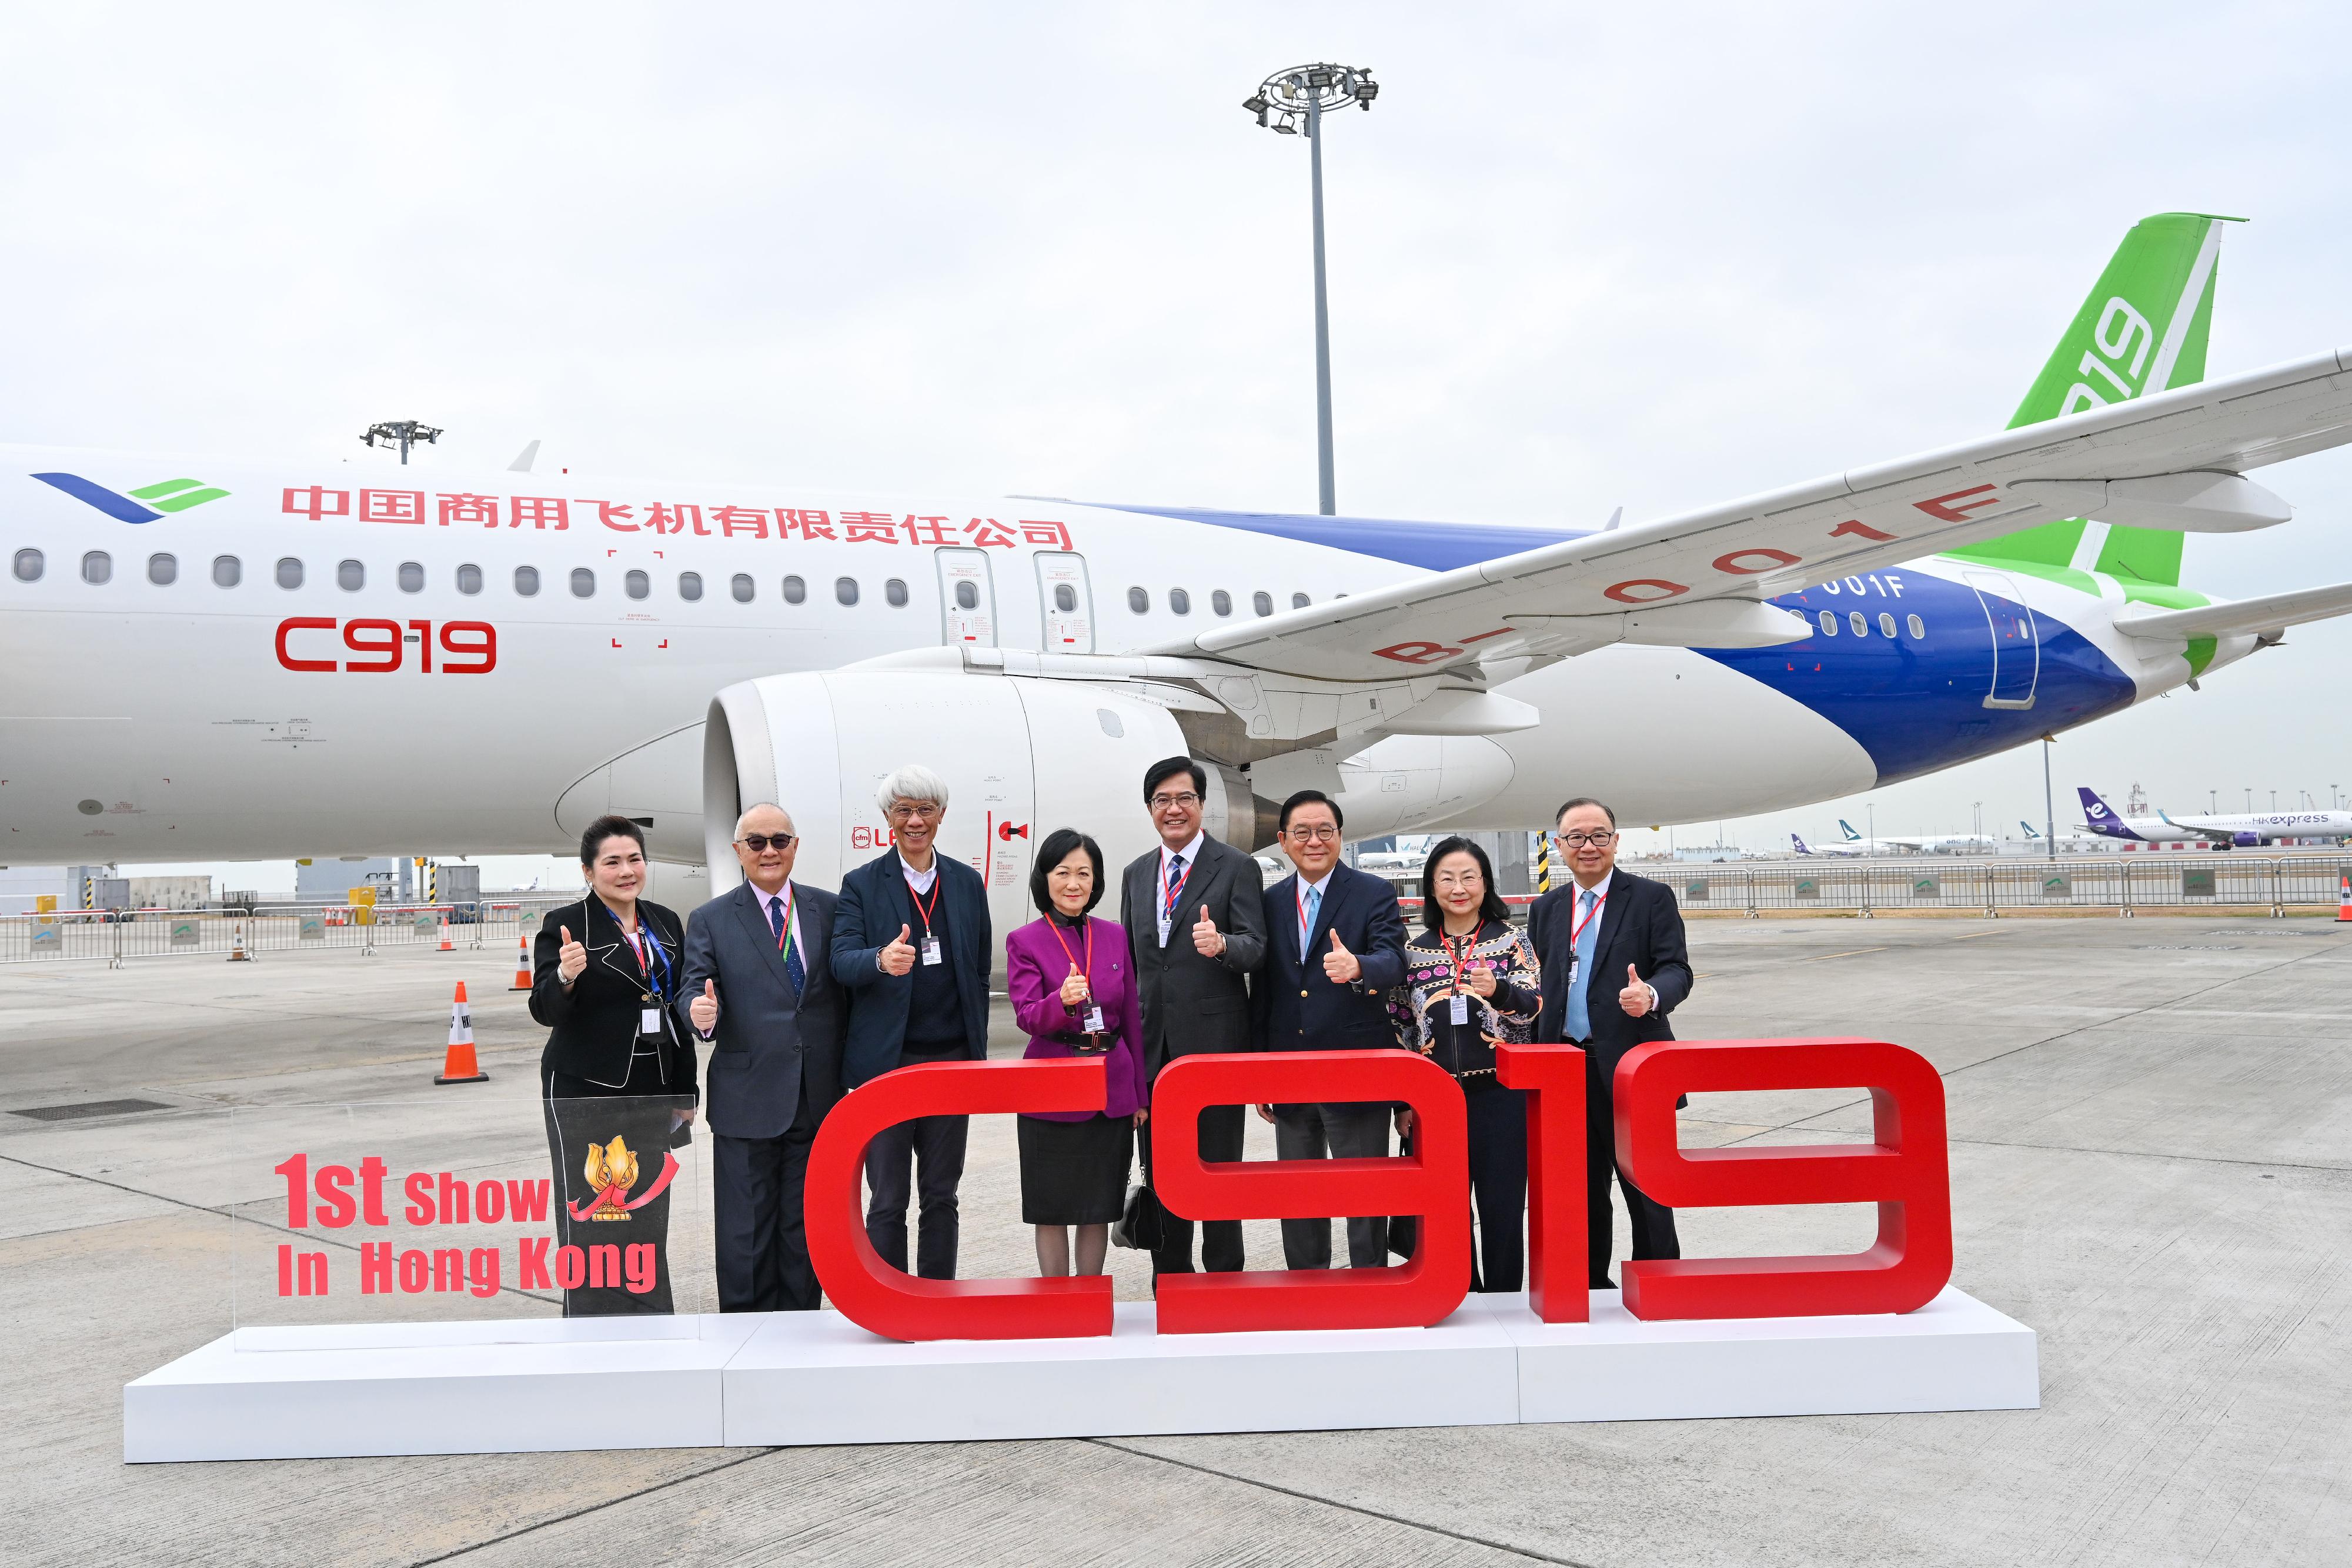 Non-official Members of the Executive Council (ExCo Non-official Members) today (December 14) visited the home-developed aircraft C919 and ARJ21. Photo shows the ExCo Non-official Members with the Deputy Financial Secretary, Mr Michael Wong (fourth right), and the General Manager of Business Aviation Centre Ltd, Ms Madonna Fung (first left), in front of aircraft C919.